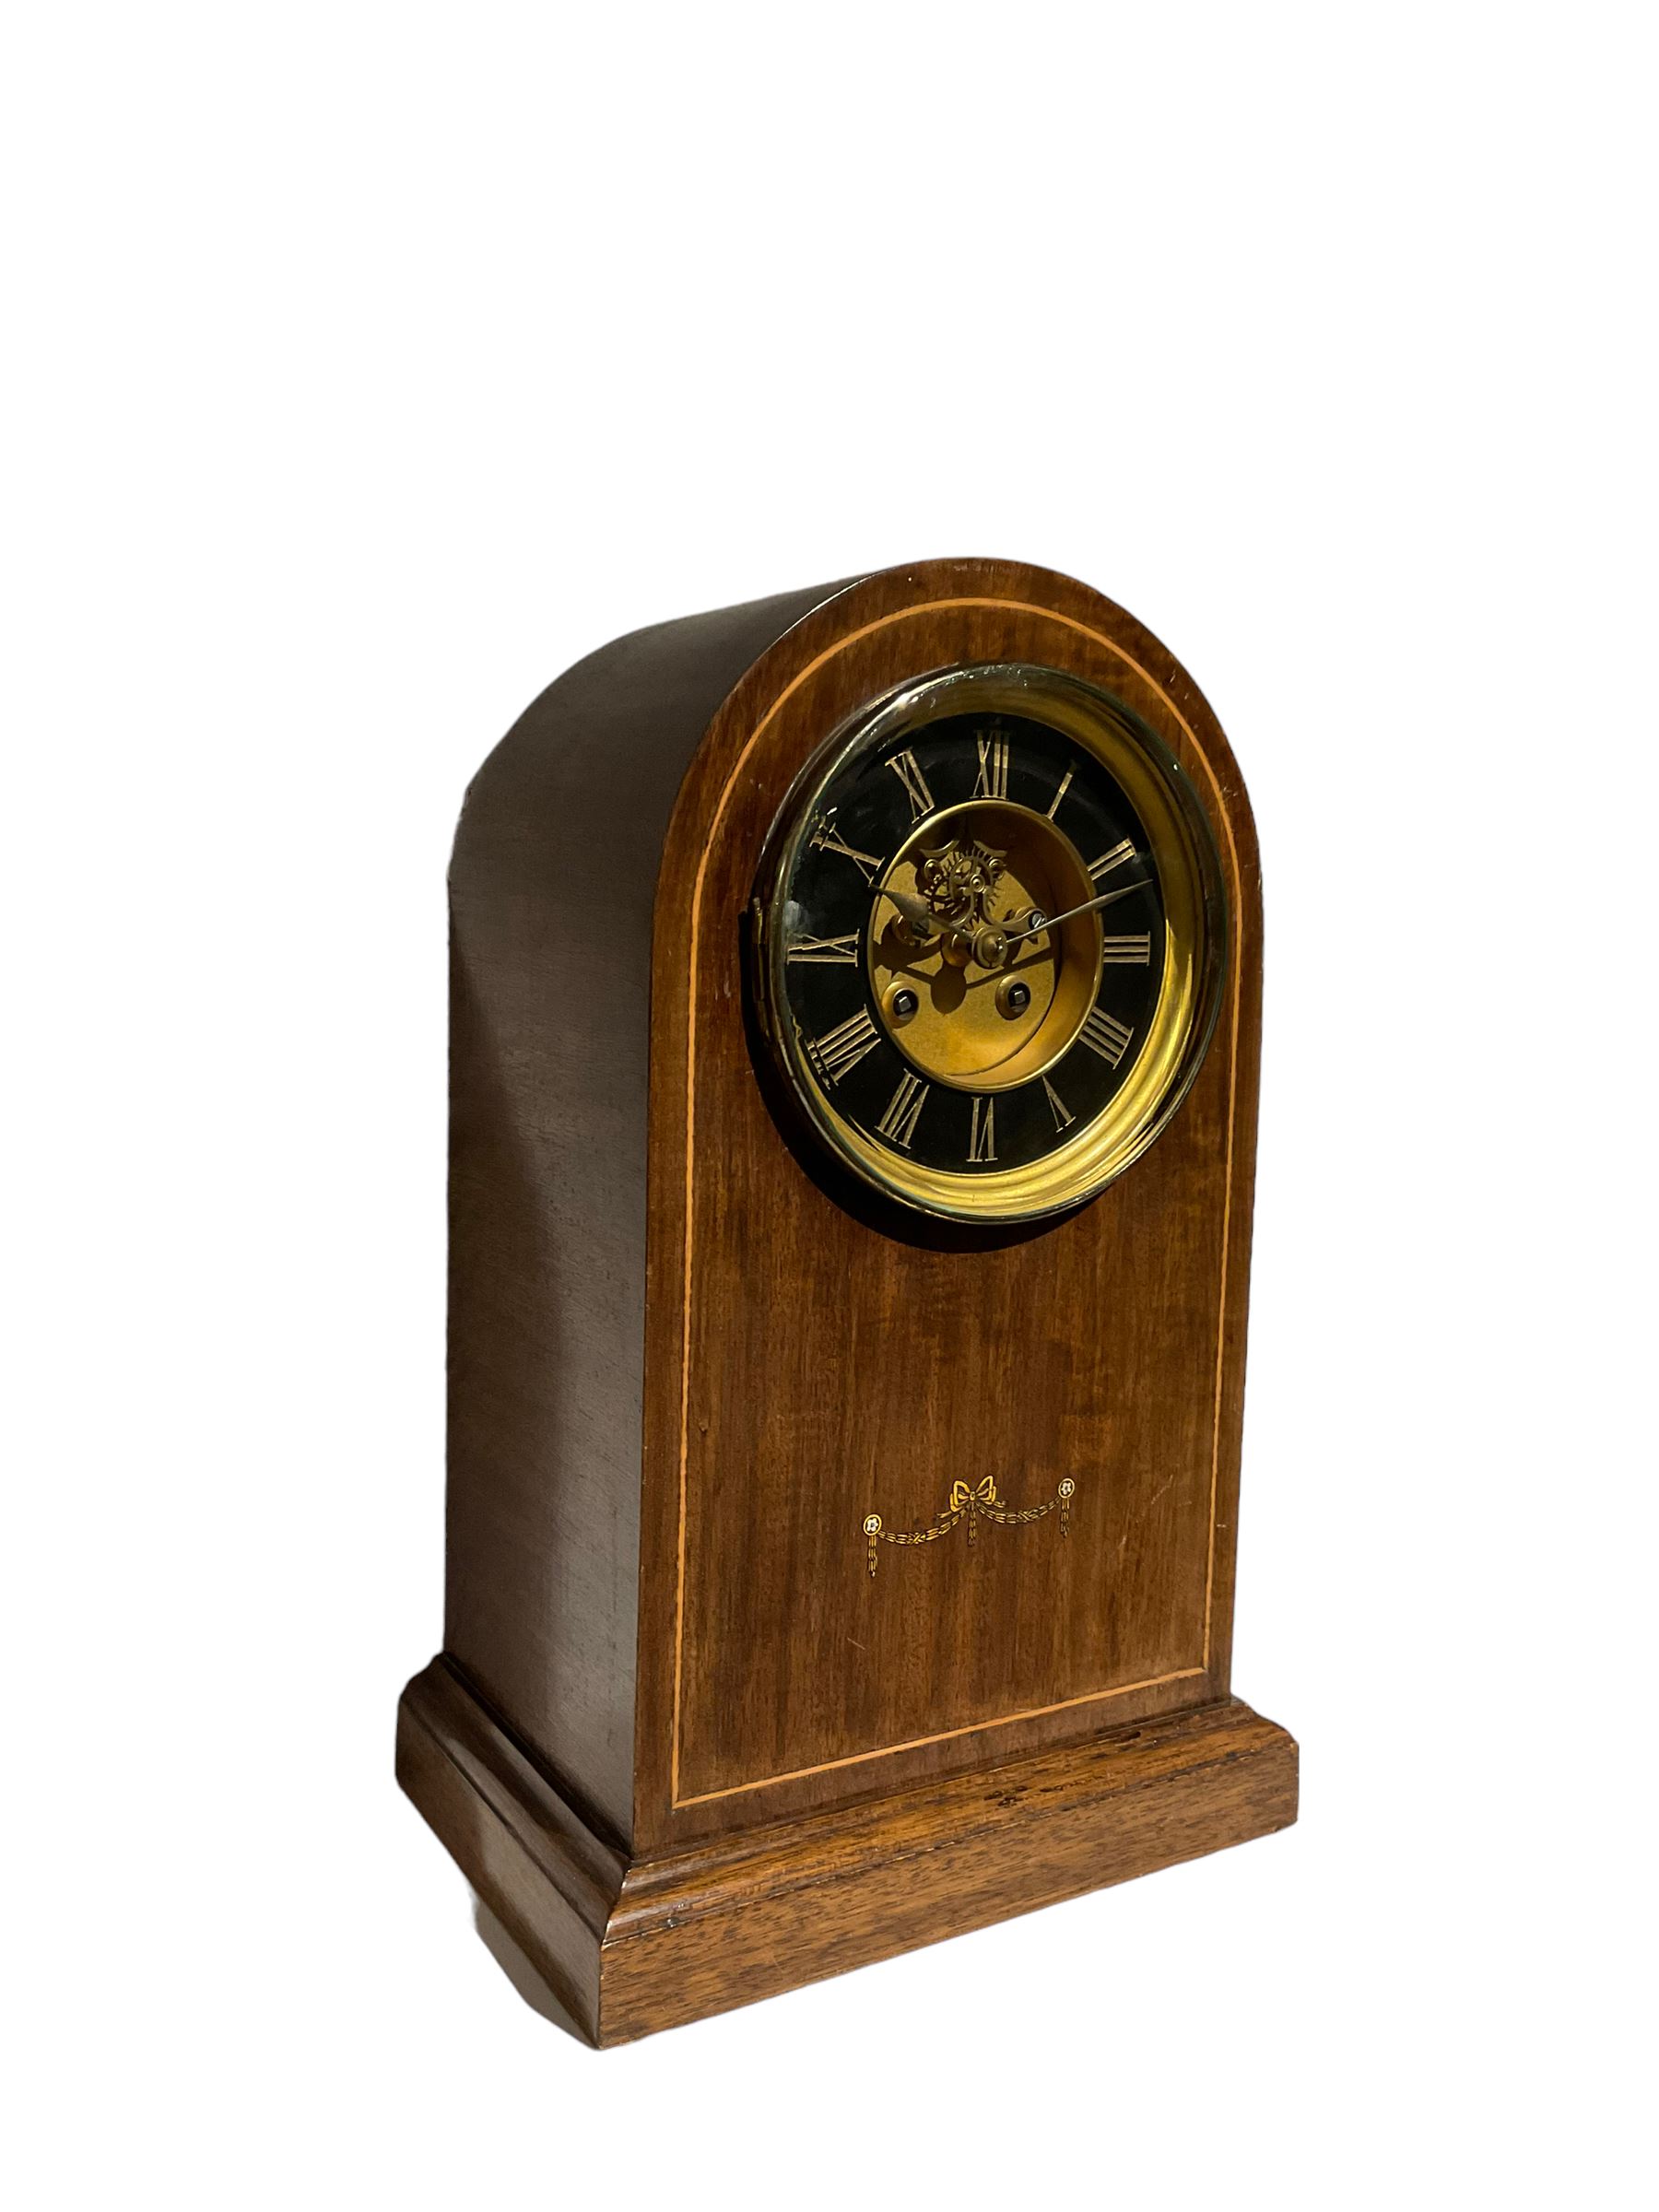 French - 19th-century 8-day mantle clock in a mahogany case - Image 5 of 6